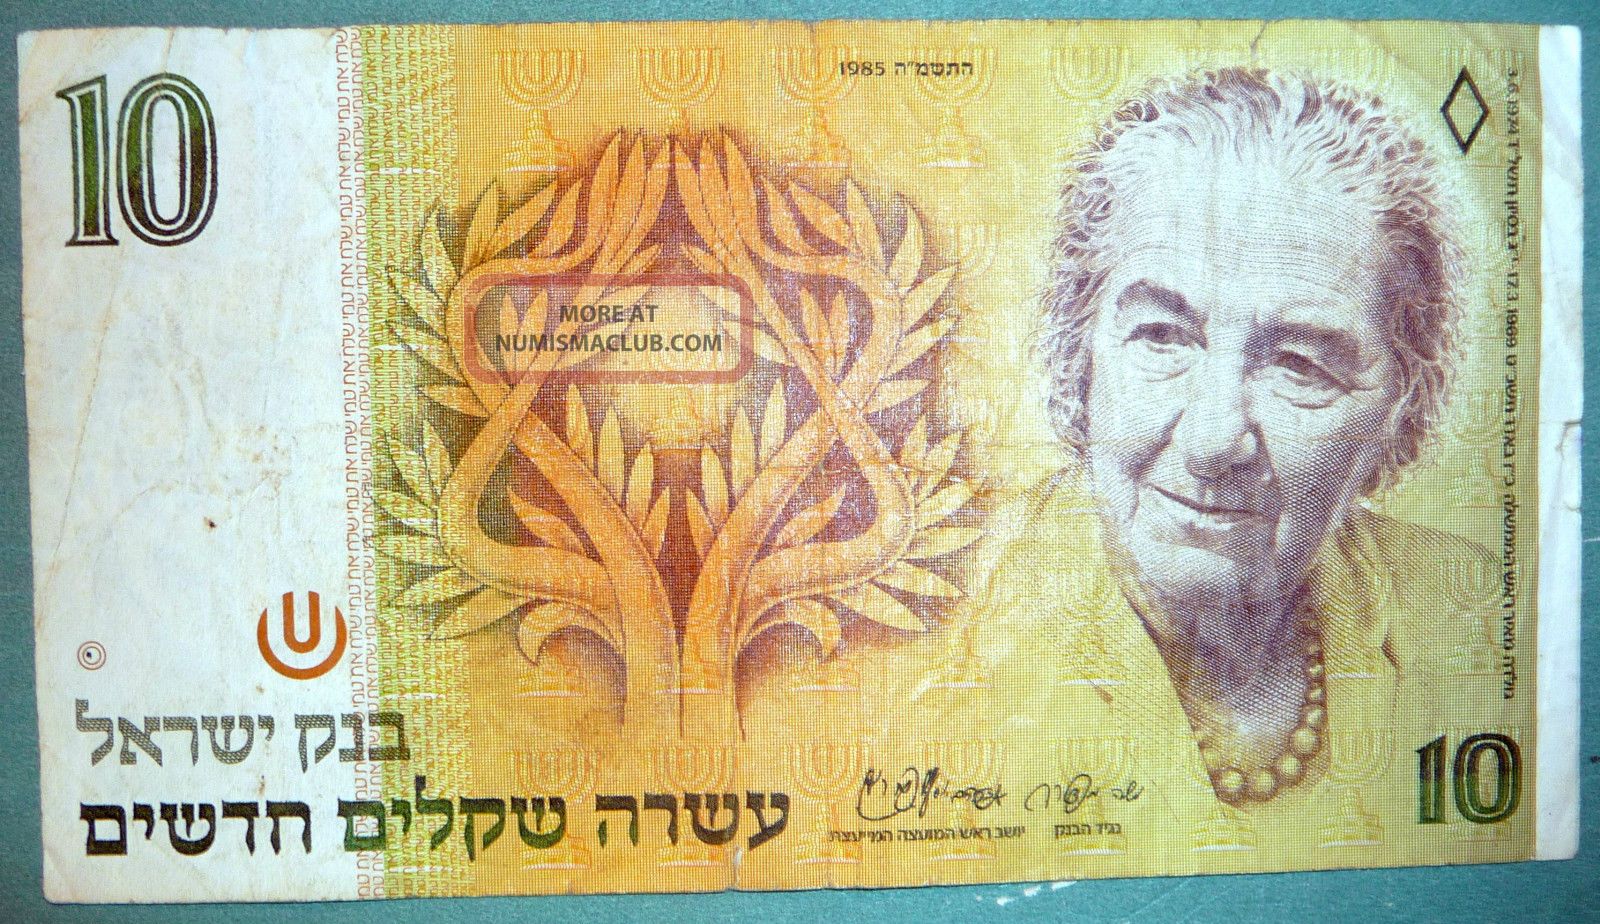 Israel 10 Sheqels Note, P 53 A, Issued 1985, Golda Meir, Signature 7